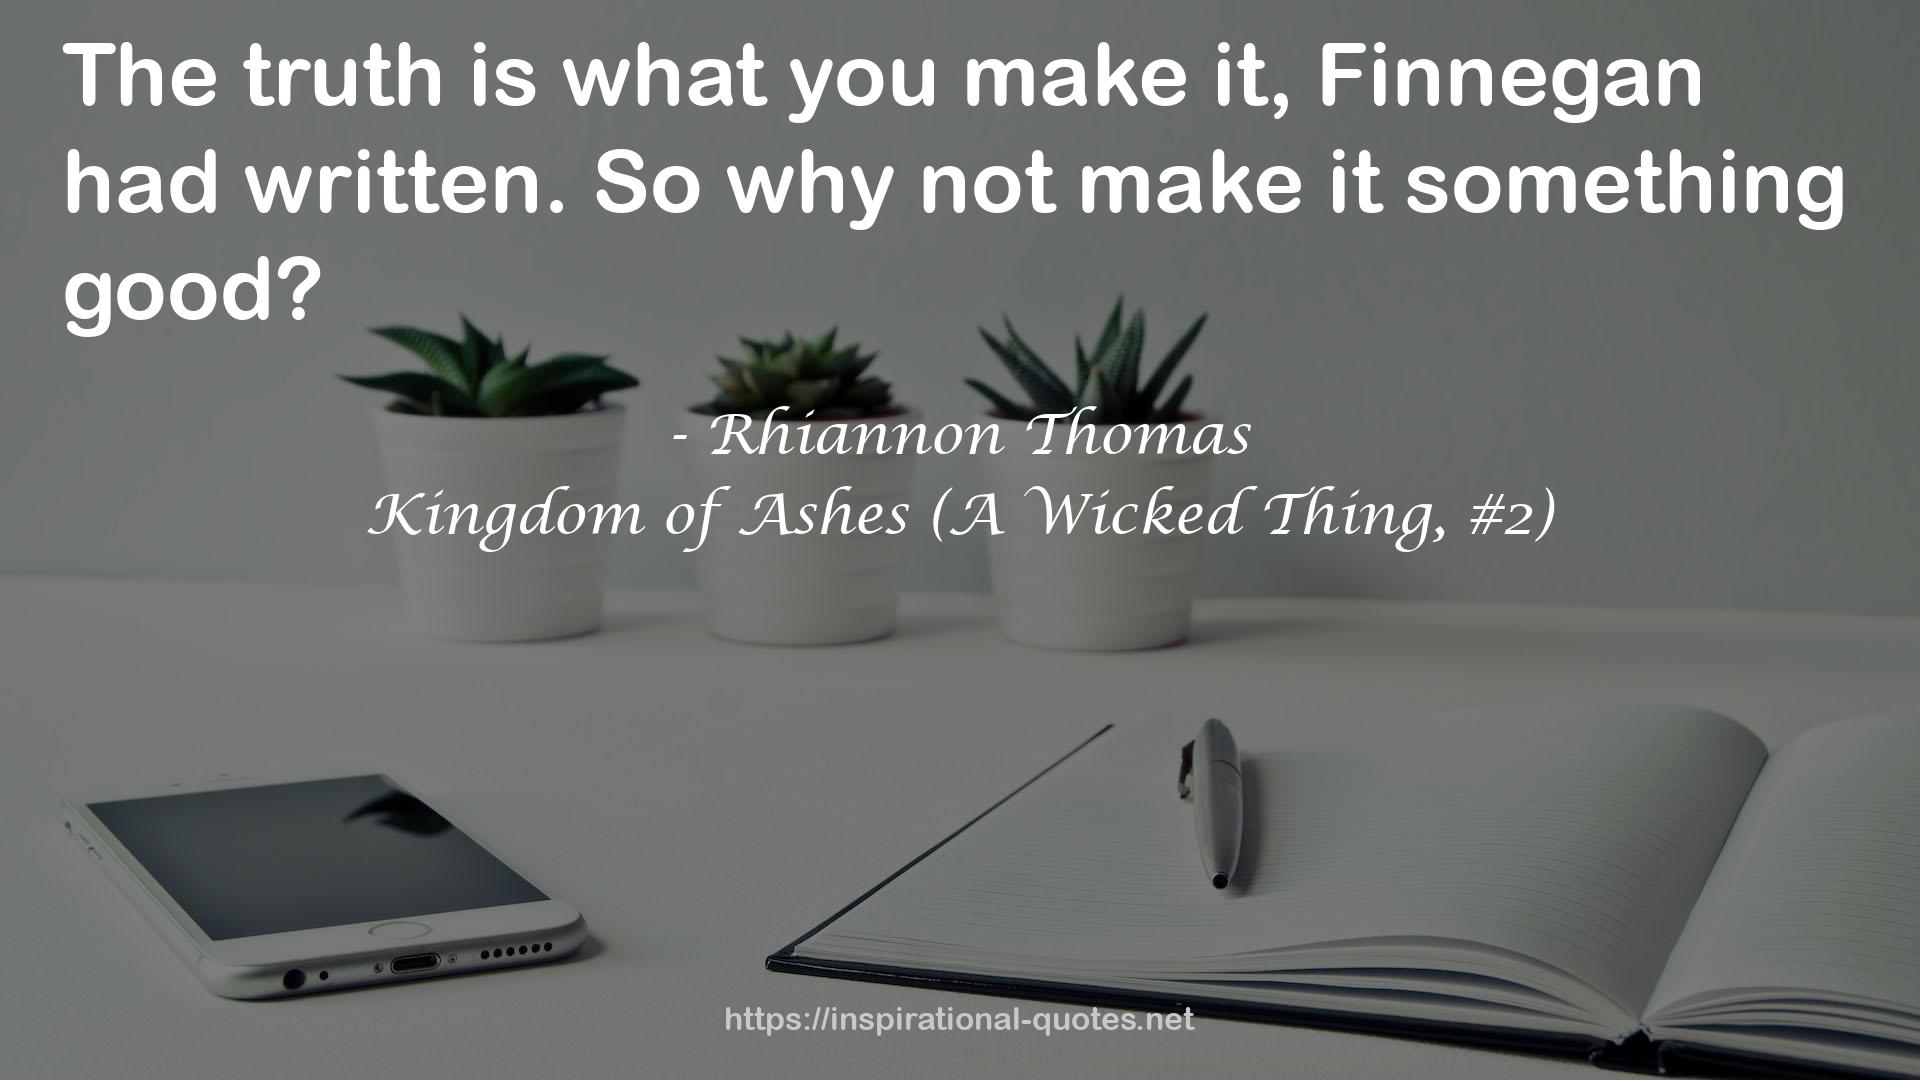 Kingdom of Ashes (A Wicked Thing, #2) QUOTES